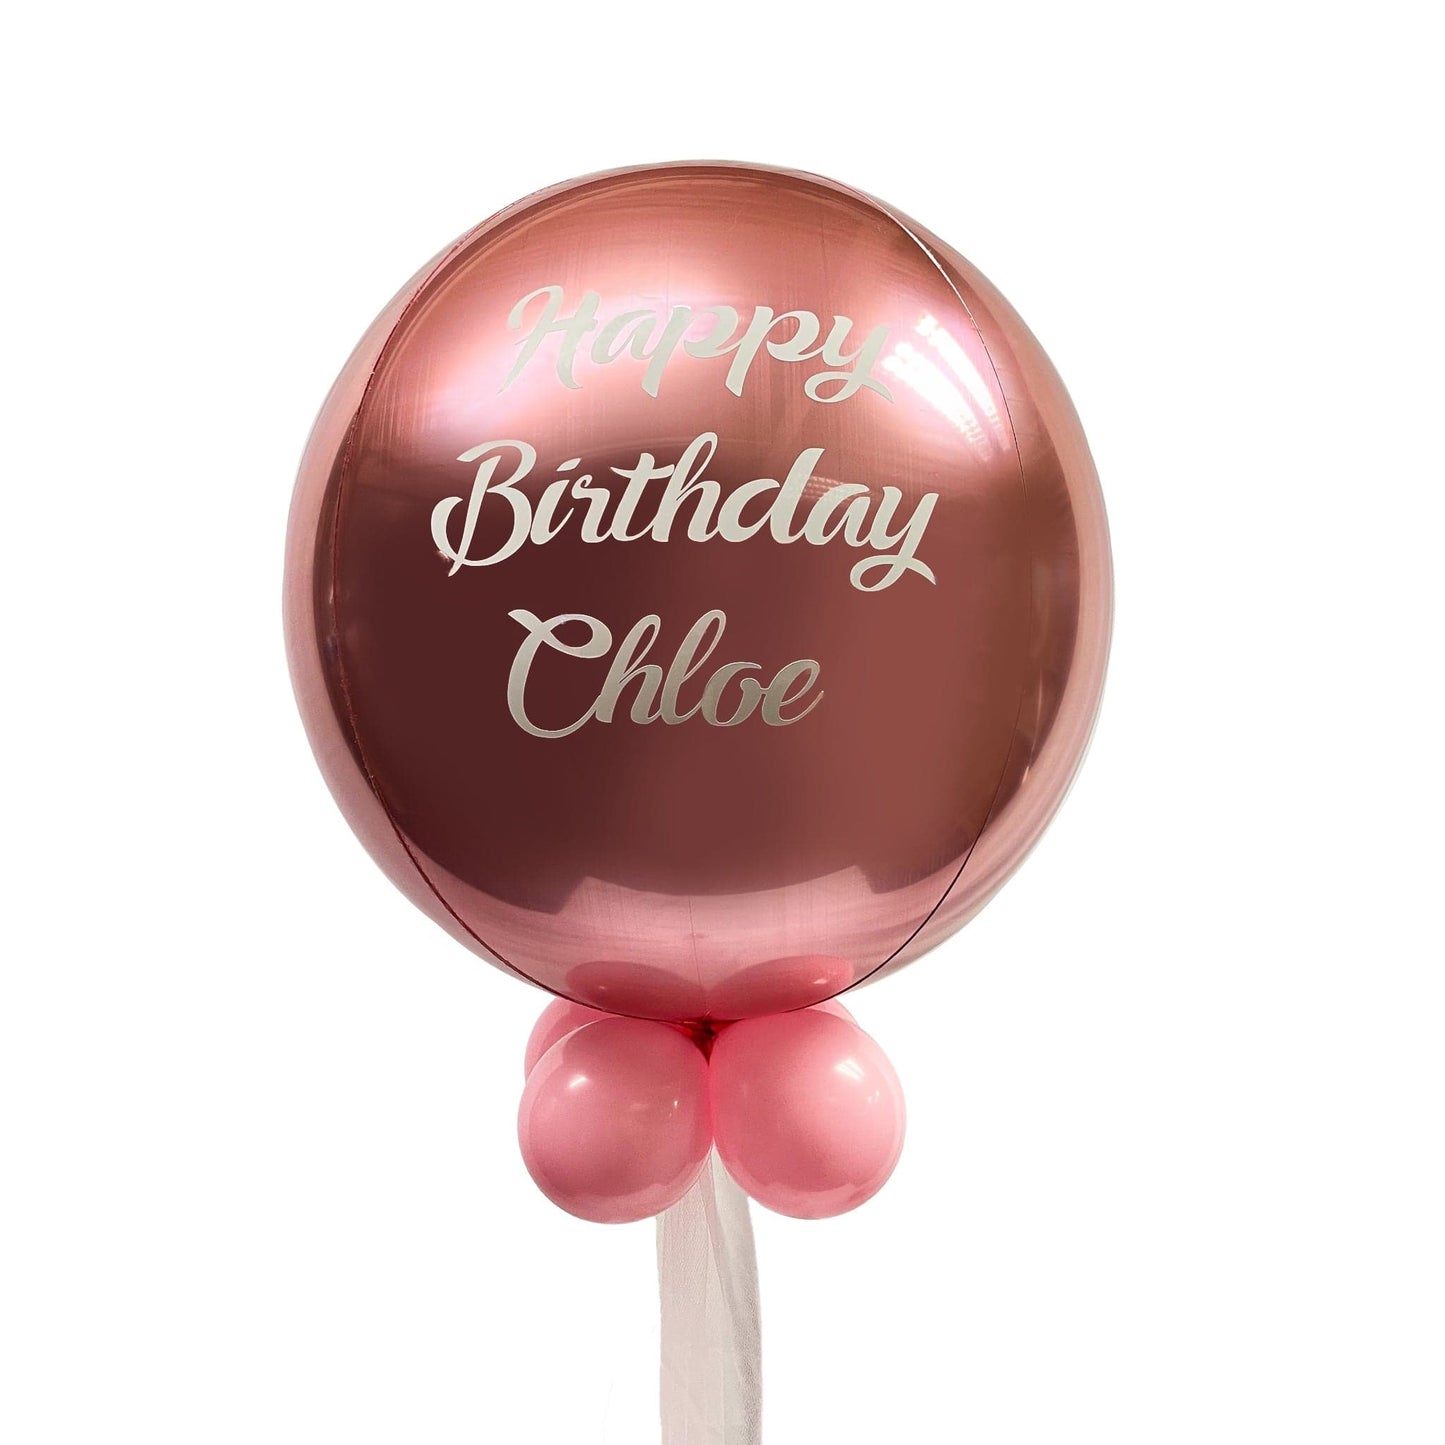 Castle Balloons Rose Gold Orbz Balloon with Vinyl Writing